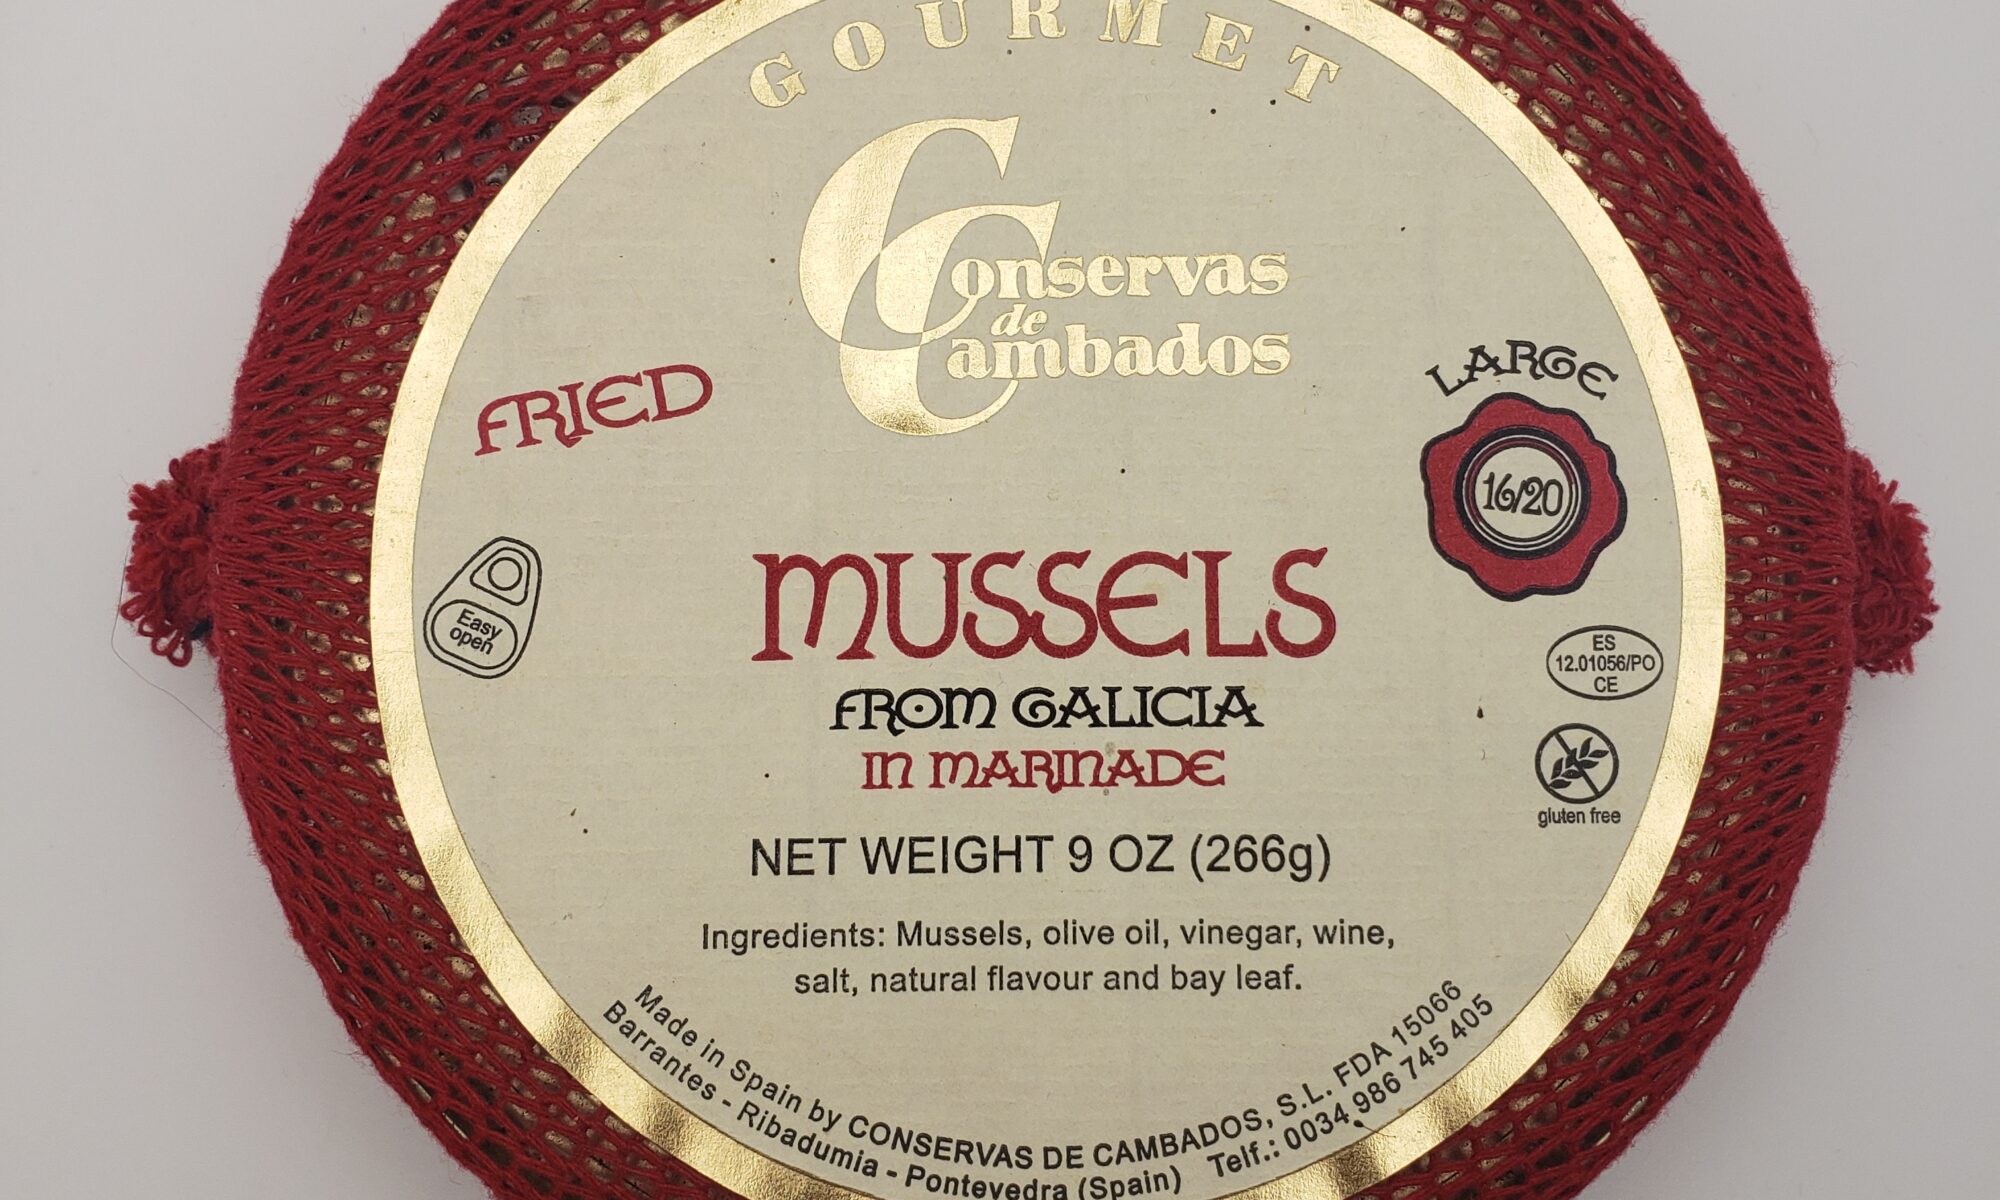 Image of Conservas de Cambados fried mussels from galicia